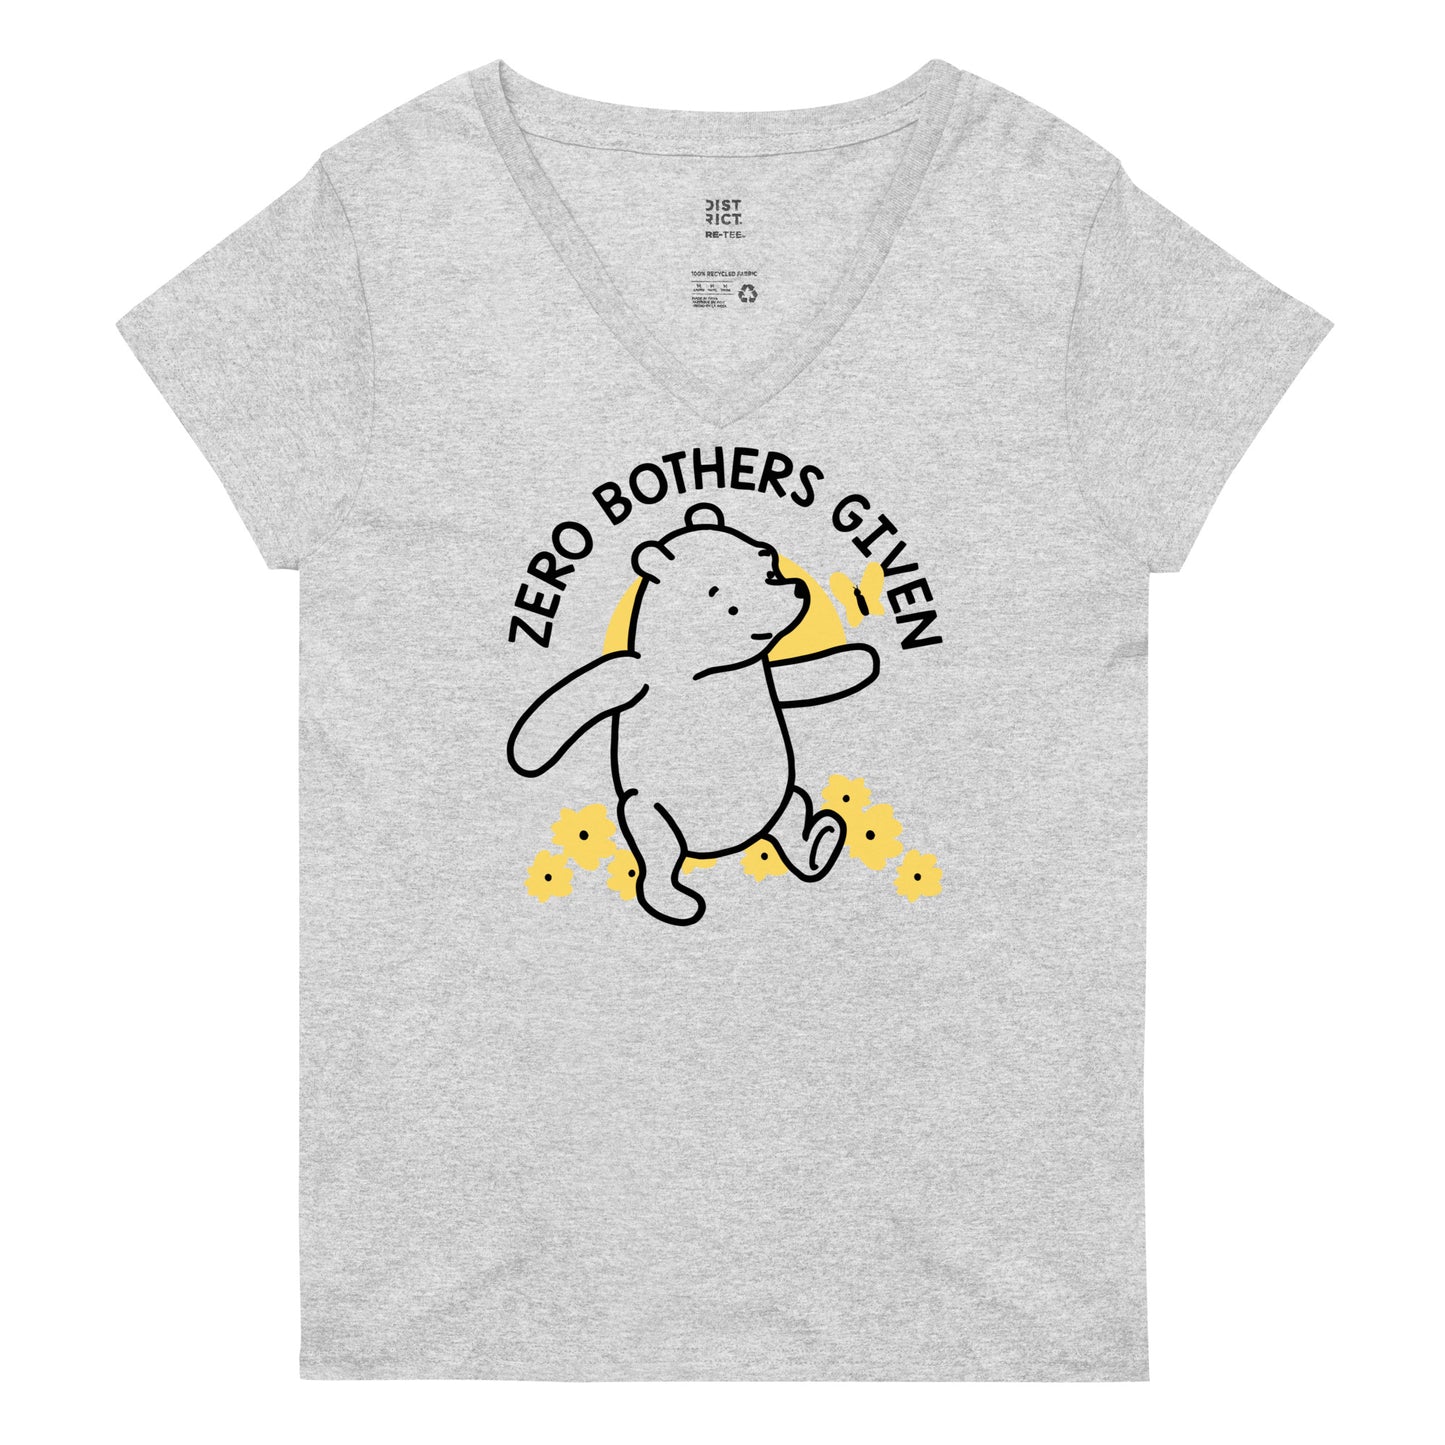 Zero Bothers Given Women's V-Neck Tee